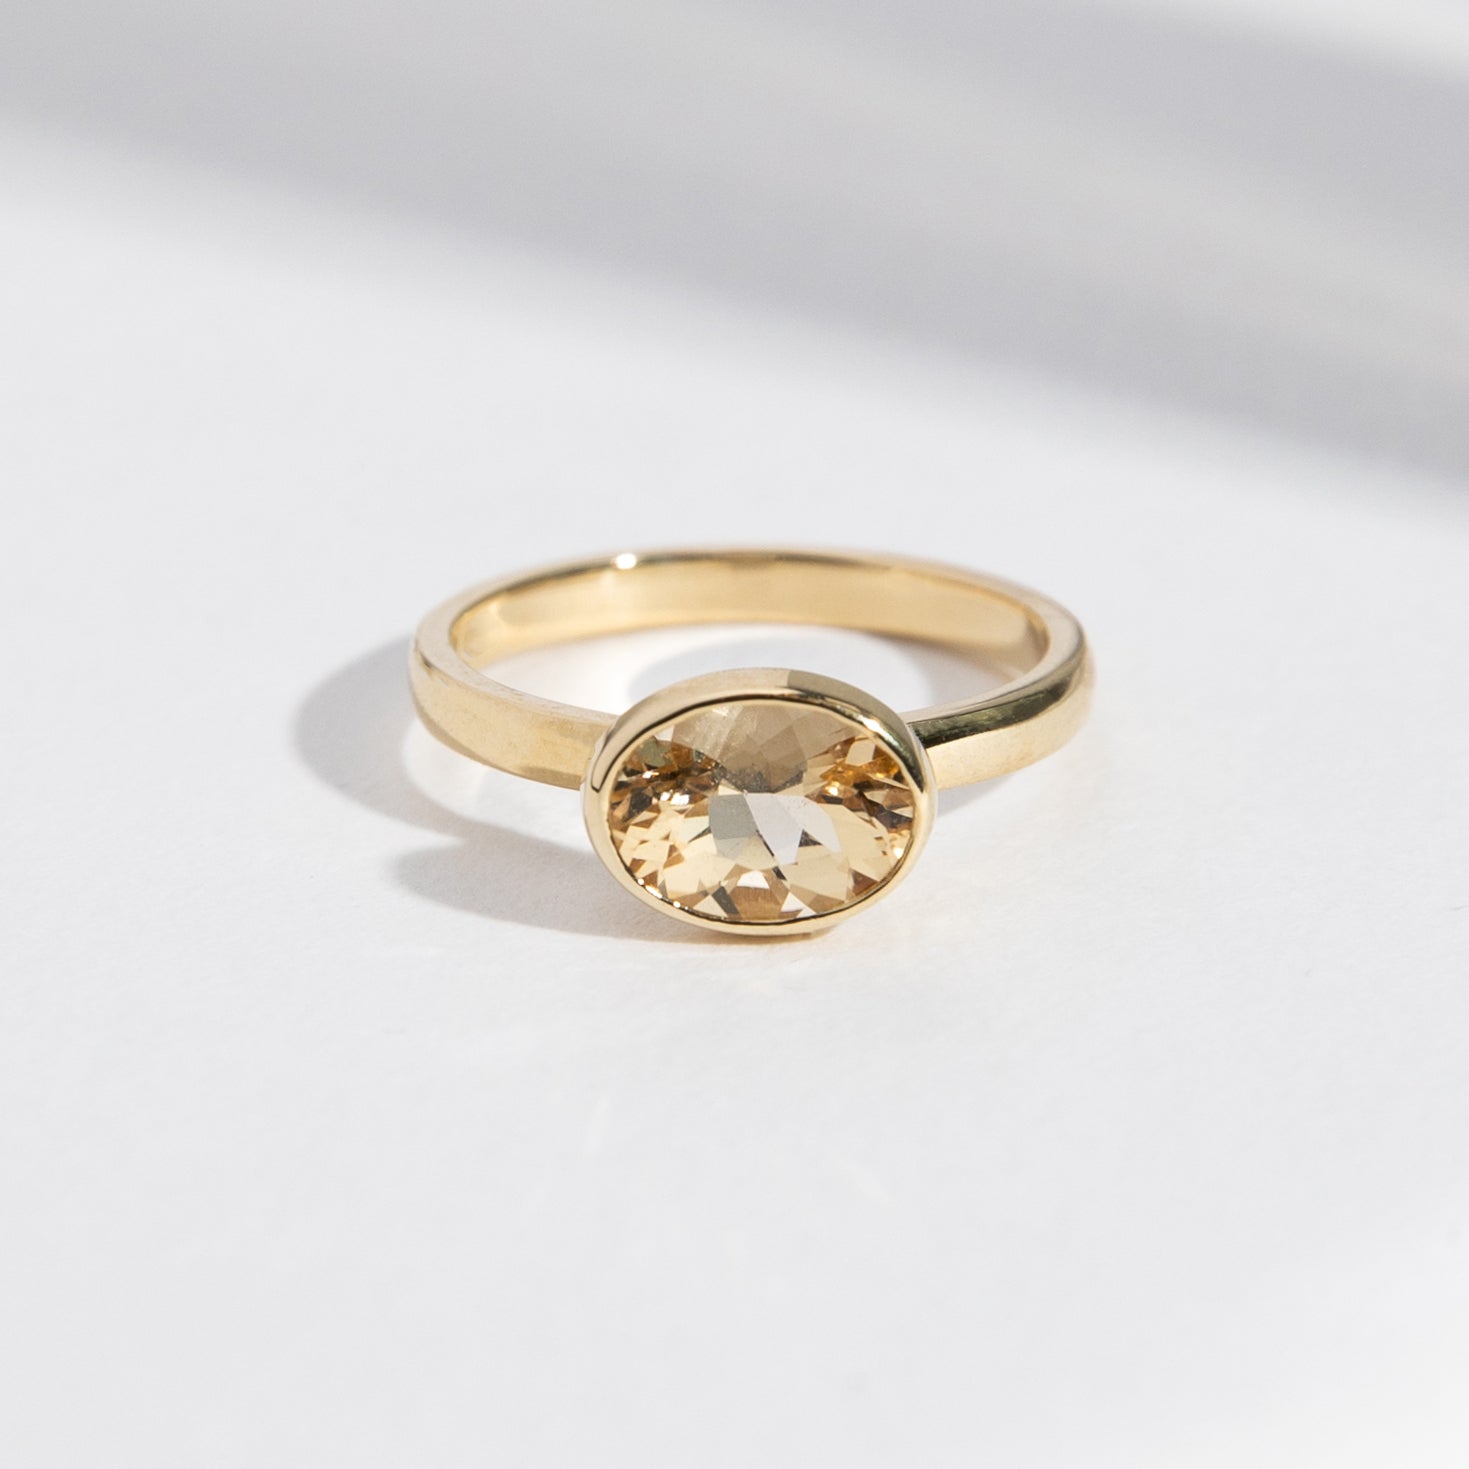 Syd Unusual Ring in 14k Gold set with a 1ct oval cut heliodor By SHW Fine Jewelry NYC